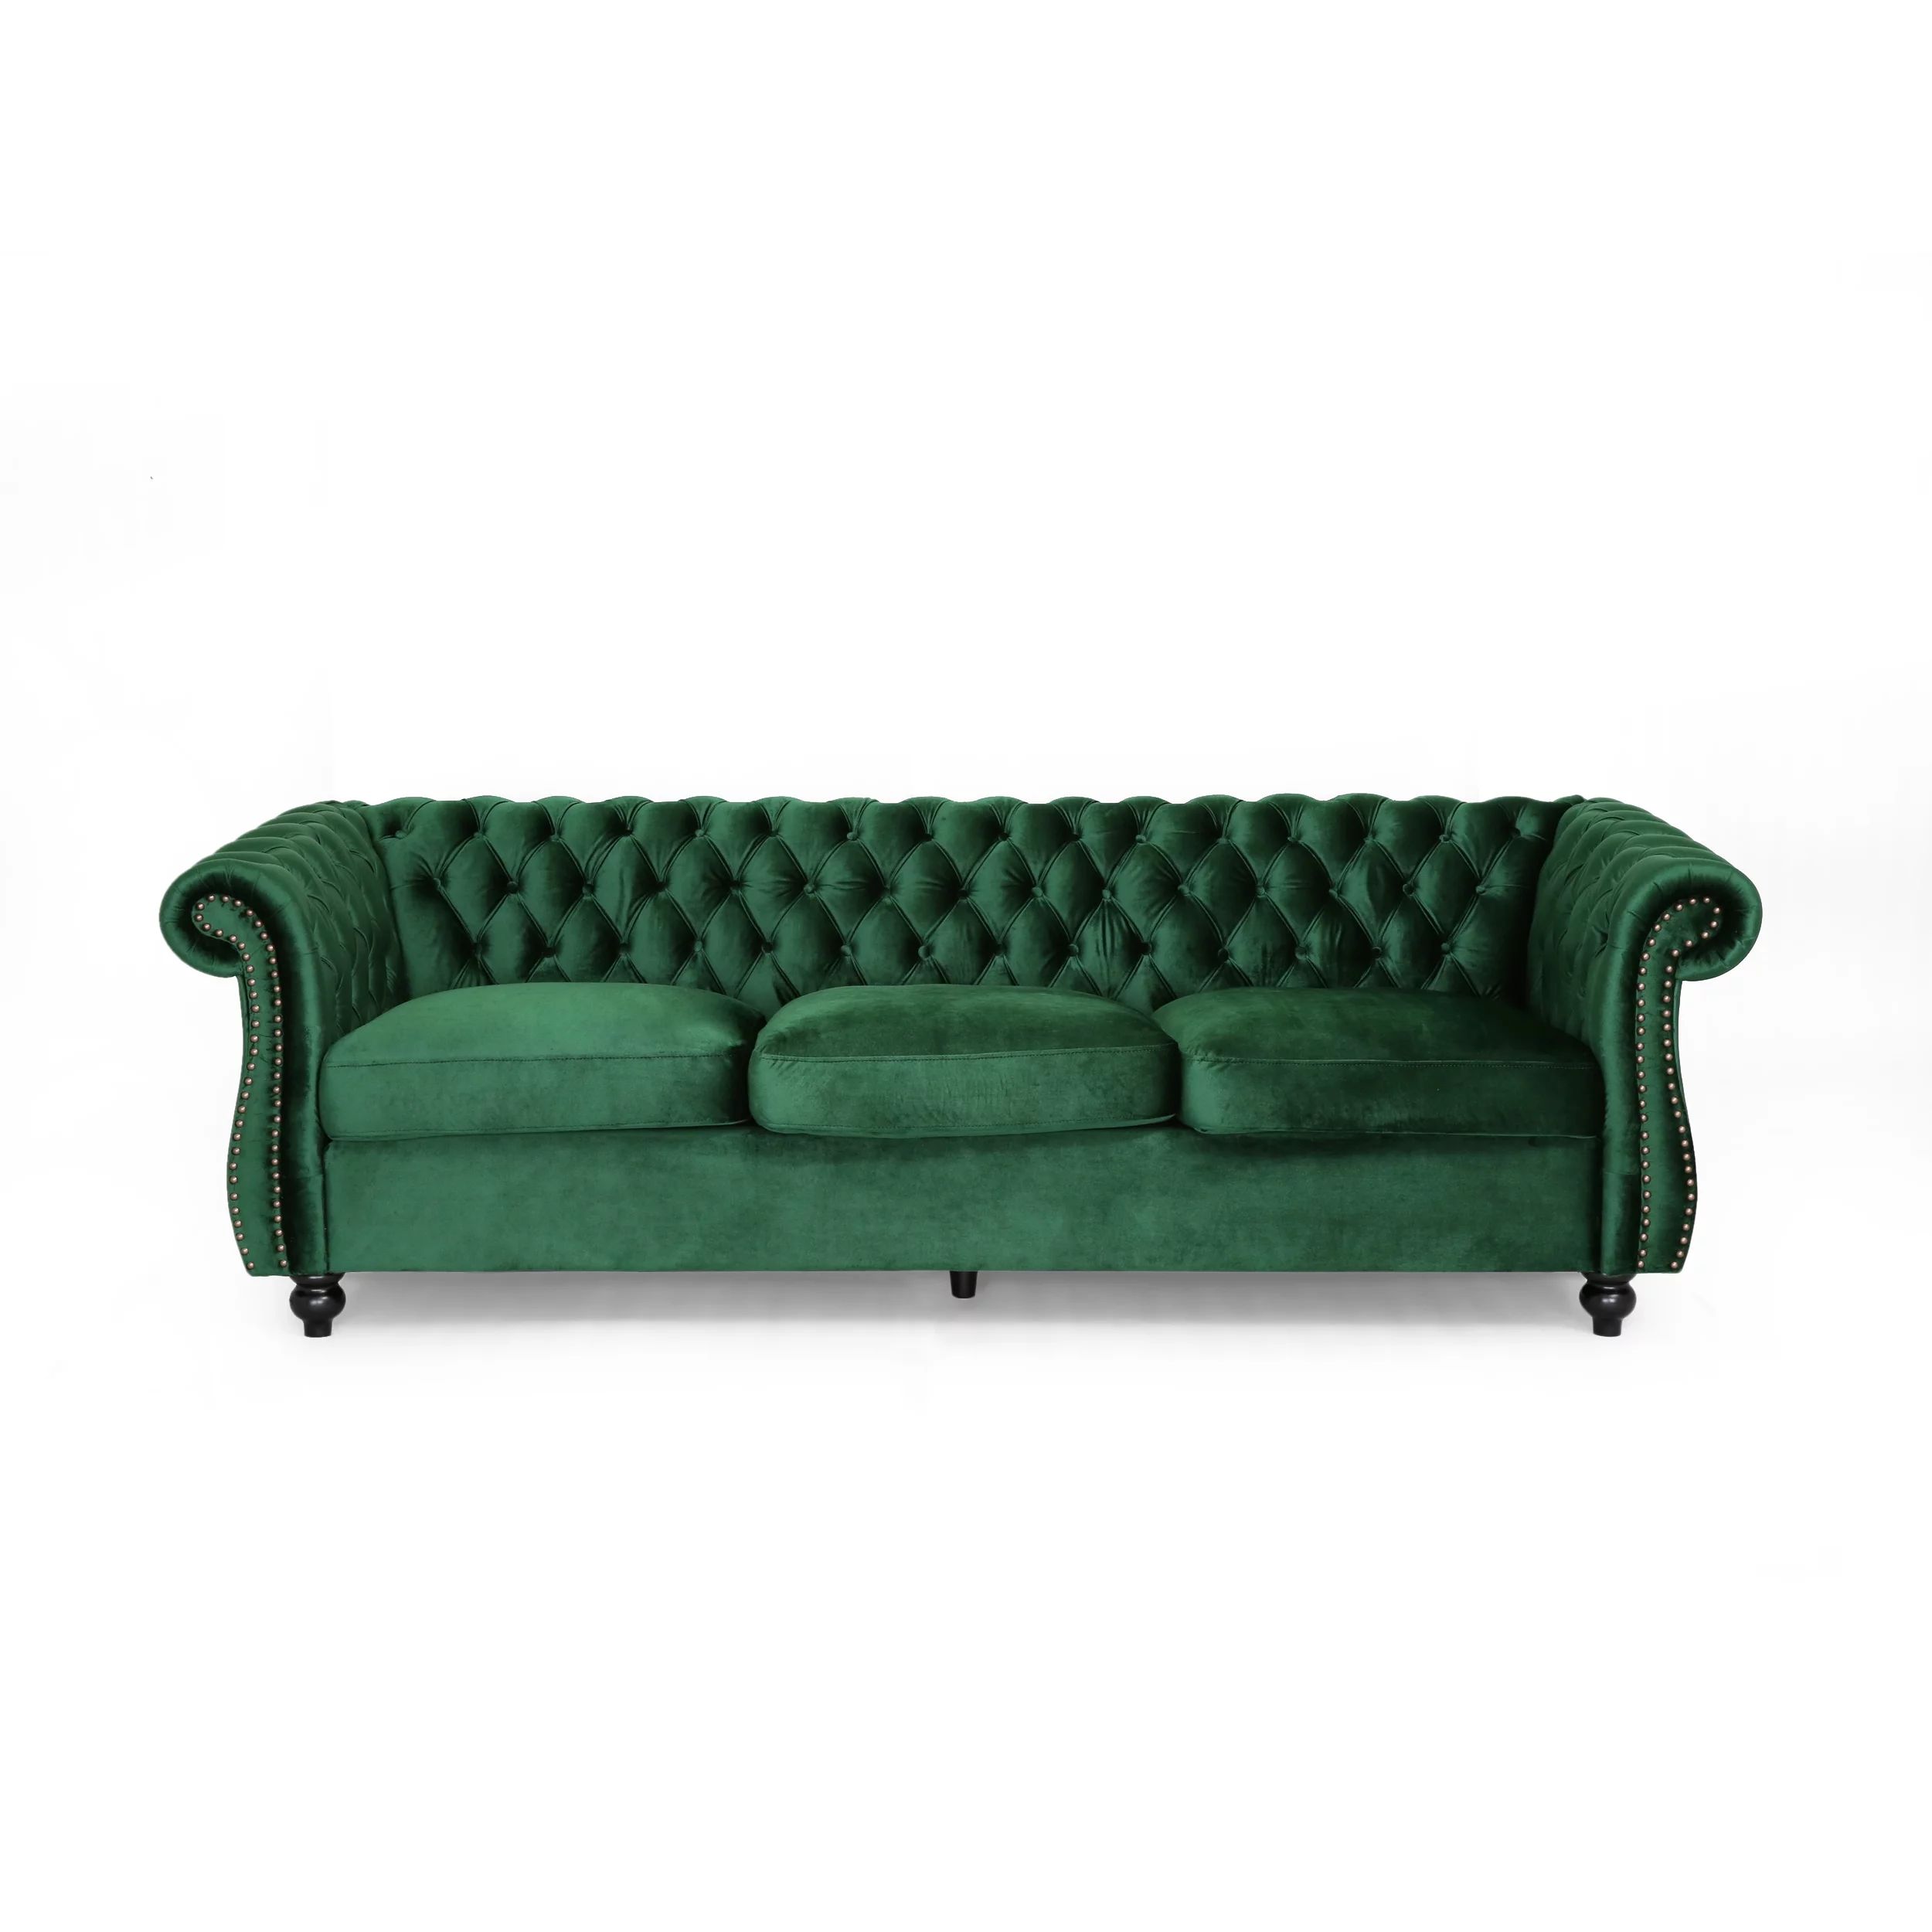 Kyle Chesterfield Tufted Jewel Toned Velvet Sofa with Scroll Arms, Emerald | Walmart (US)